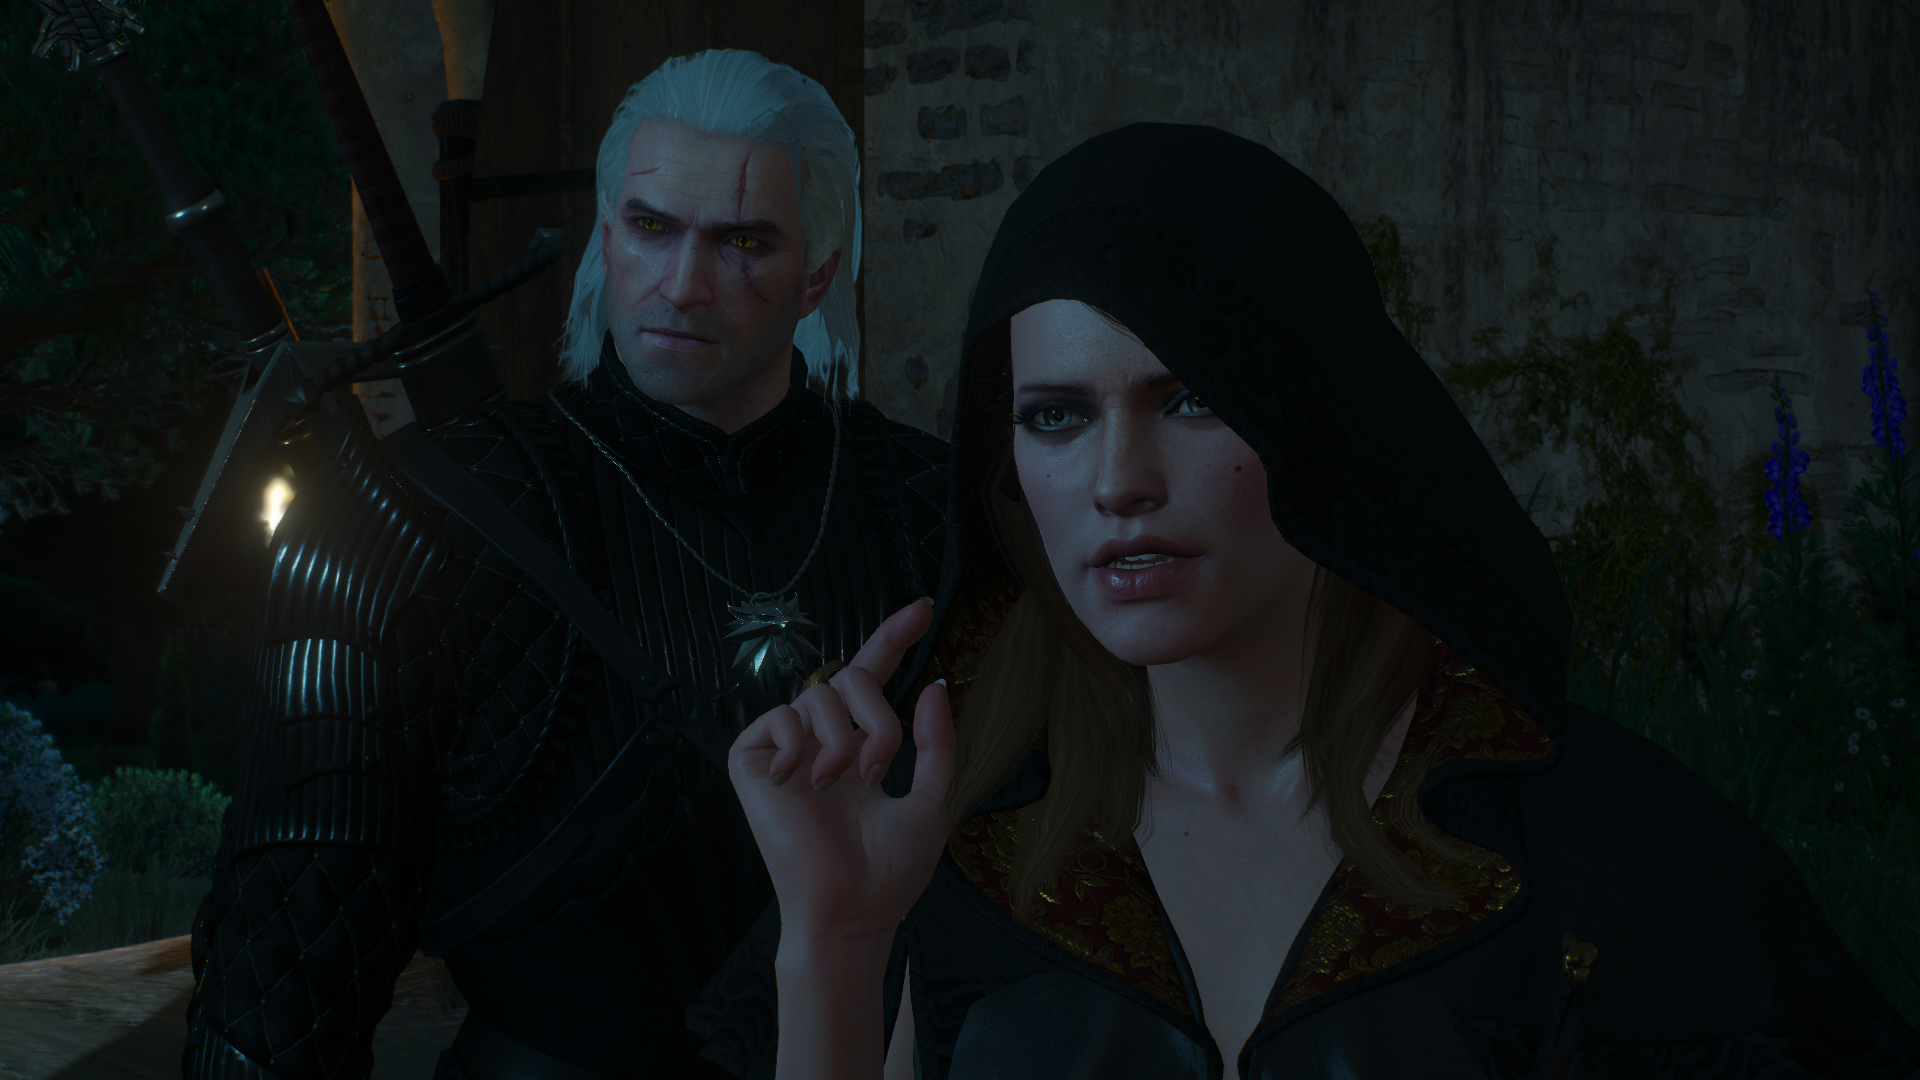 The Witcher The Witcher 3 Wild Hunt Blood And Wine The Witcher 3 Wild Hunt Anna Henrietta Video Game 1920x1080